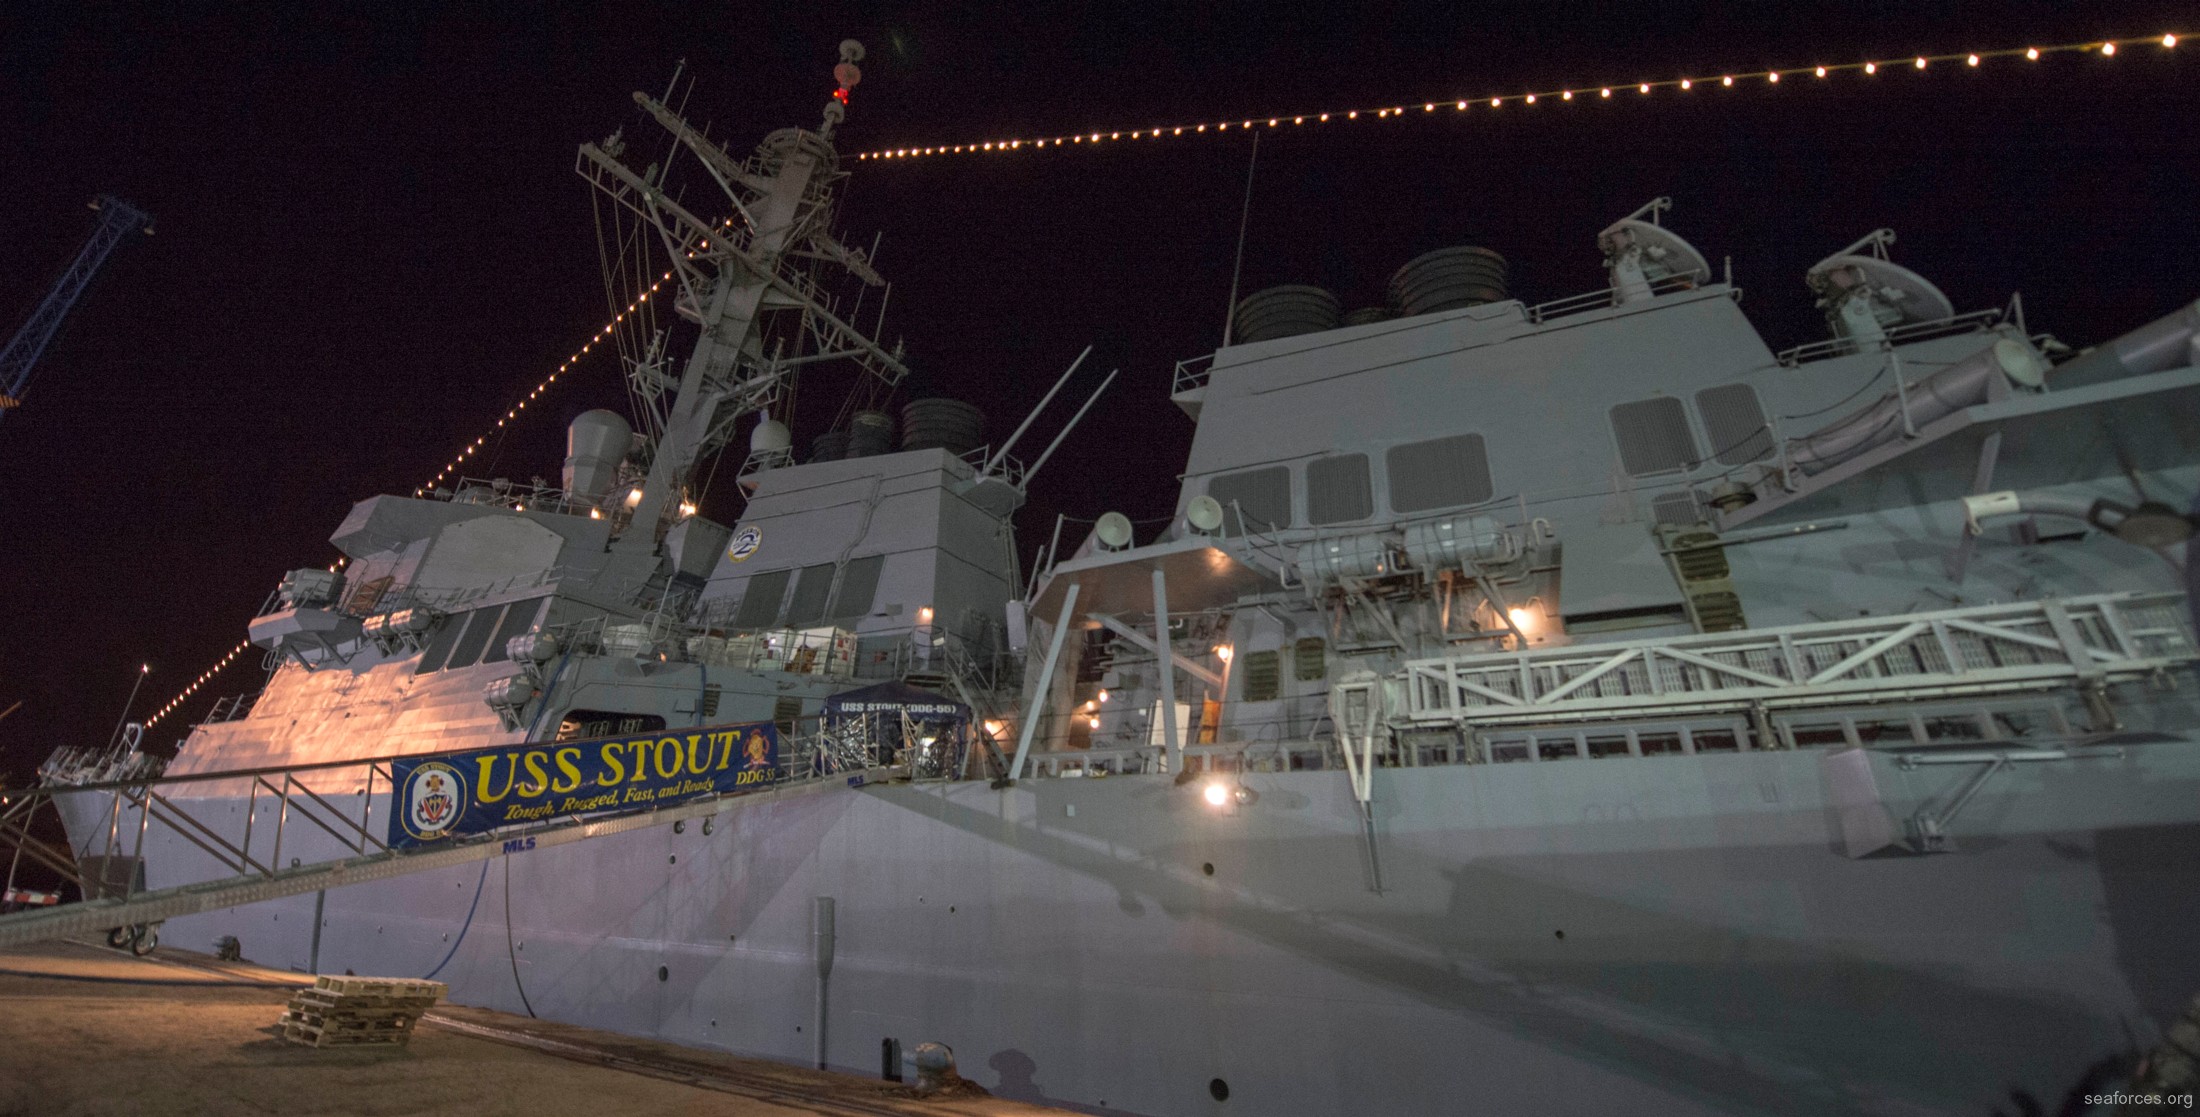 ddg-55 uss stout guided missile destroyer us navy 50 limmasol cyprus